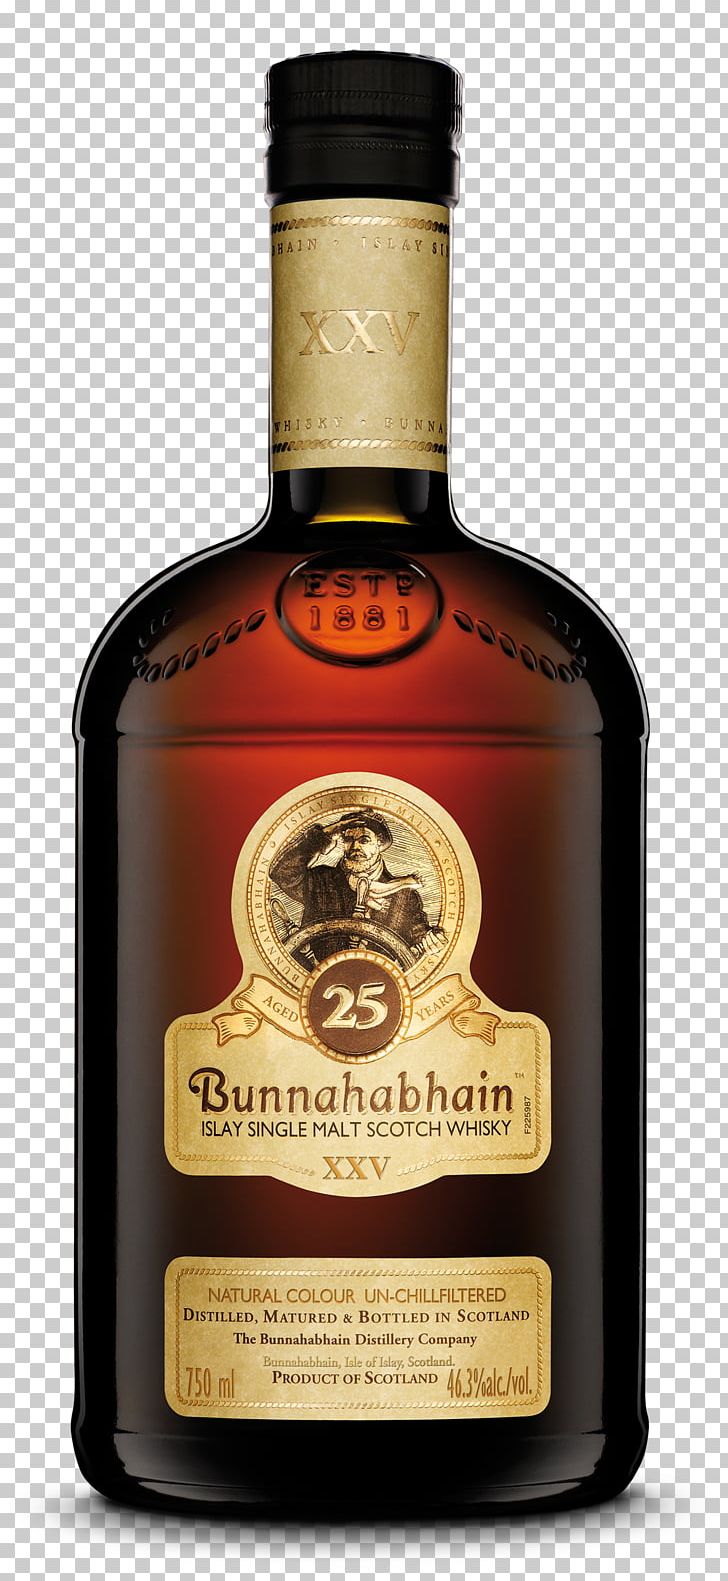 Single Malt Whisky Single Malt Scotch Whisky Whiskey Bunnahabhain 25 Year Old PNG, Clipart, Alcoholic Beverage, Bottle, Caramel Color, Cask Strength, Chill Filtering Free PNG Download